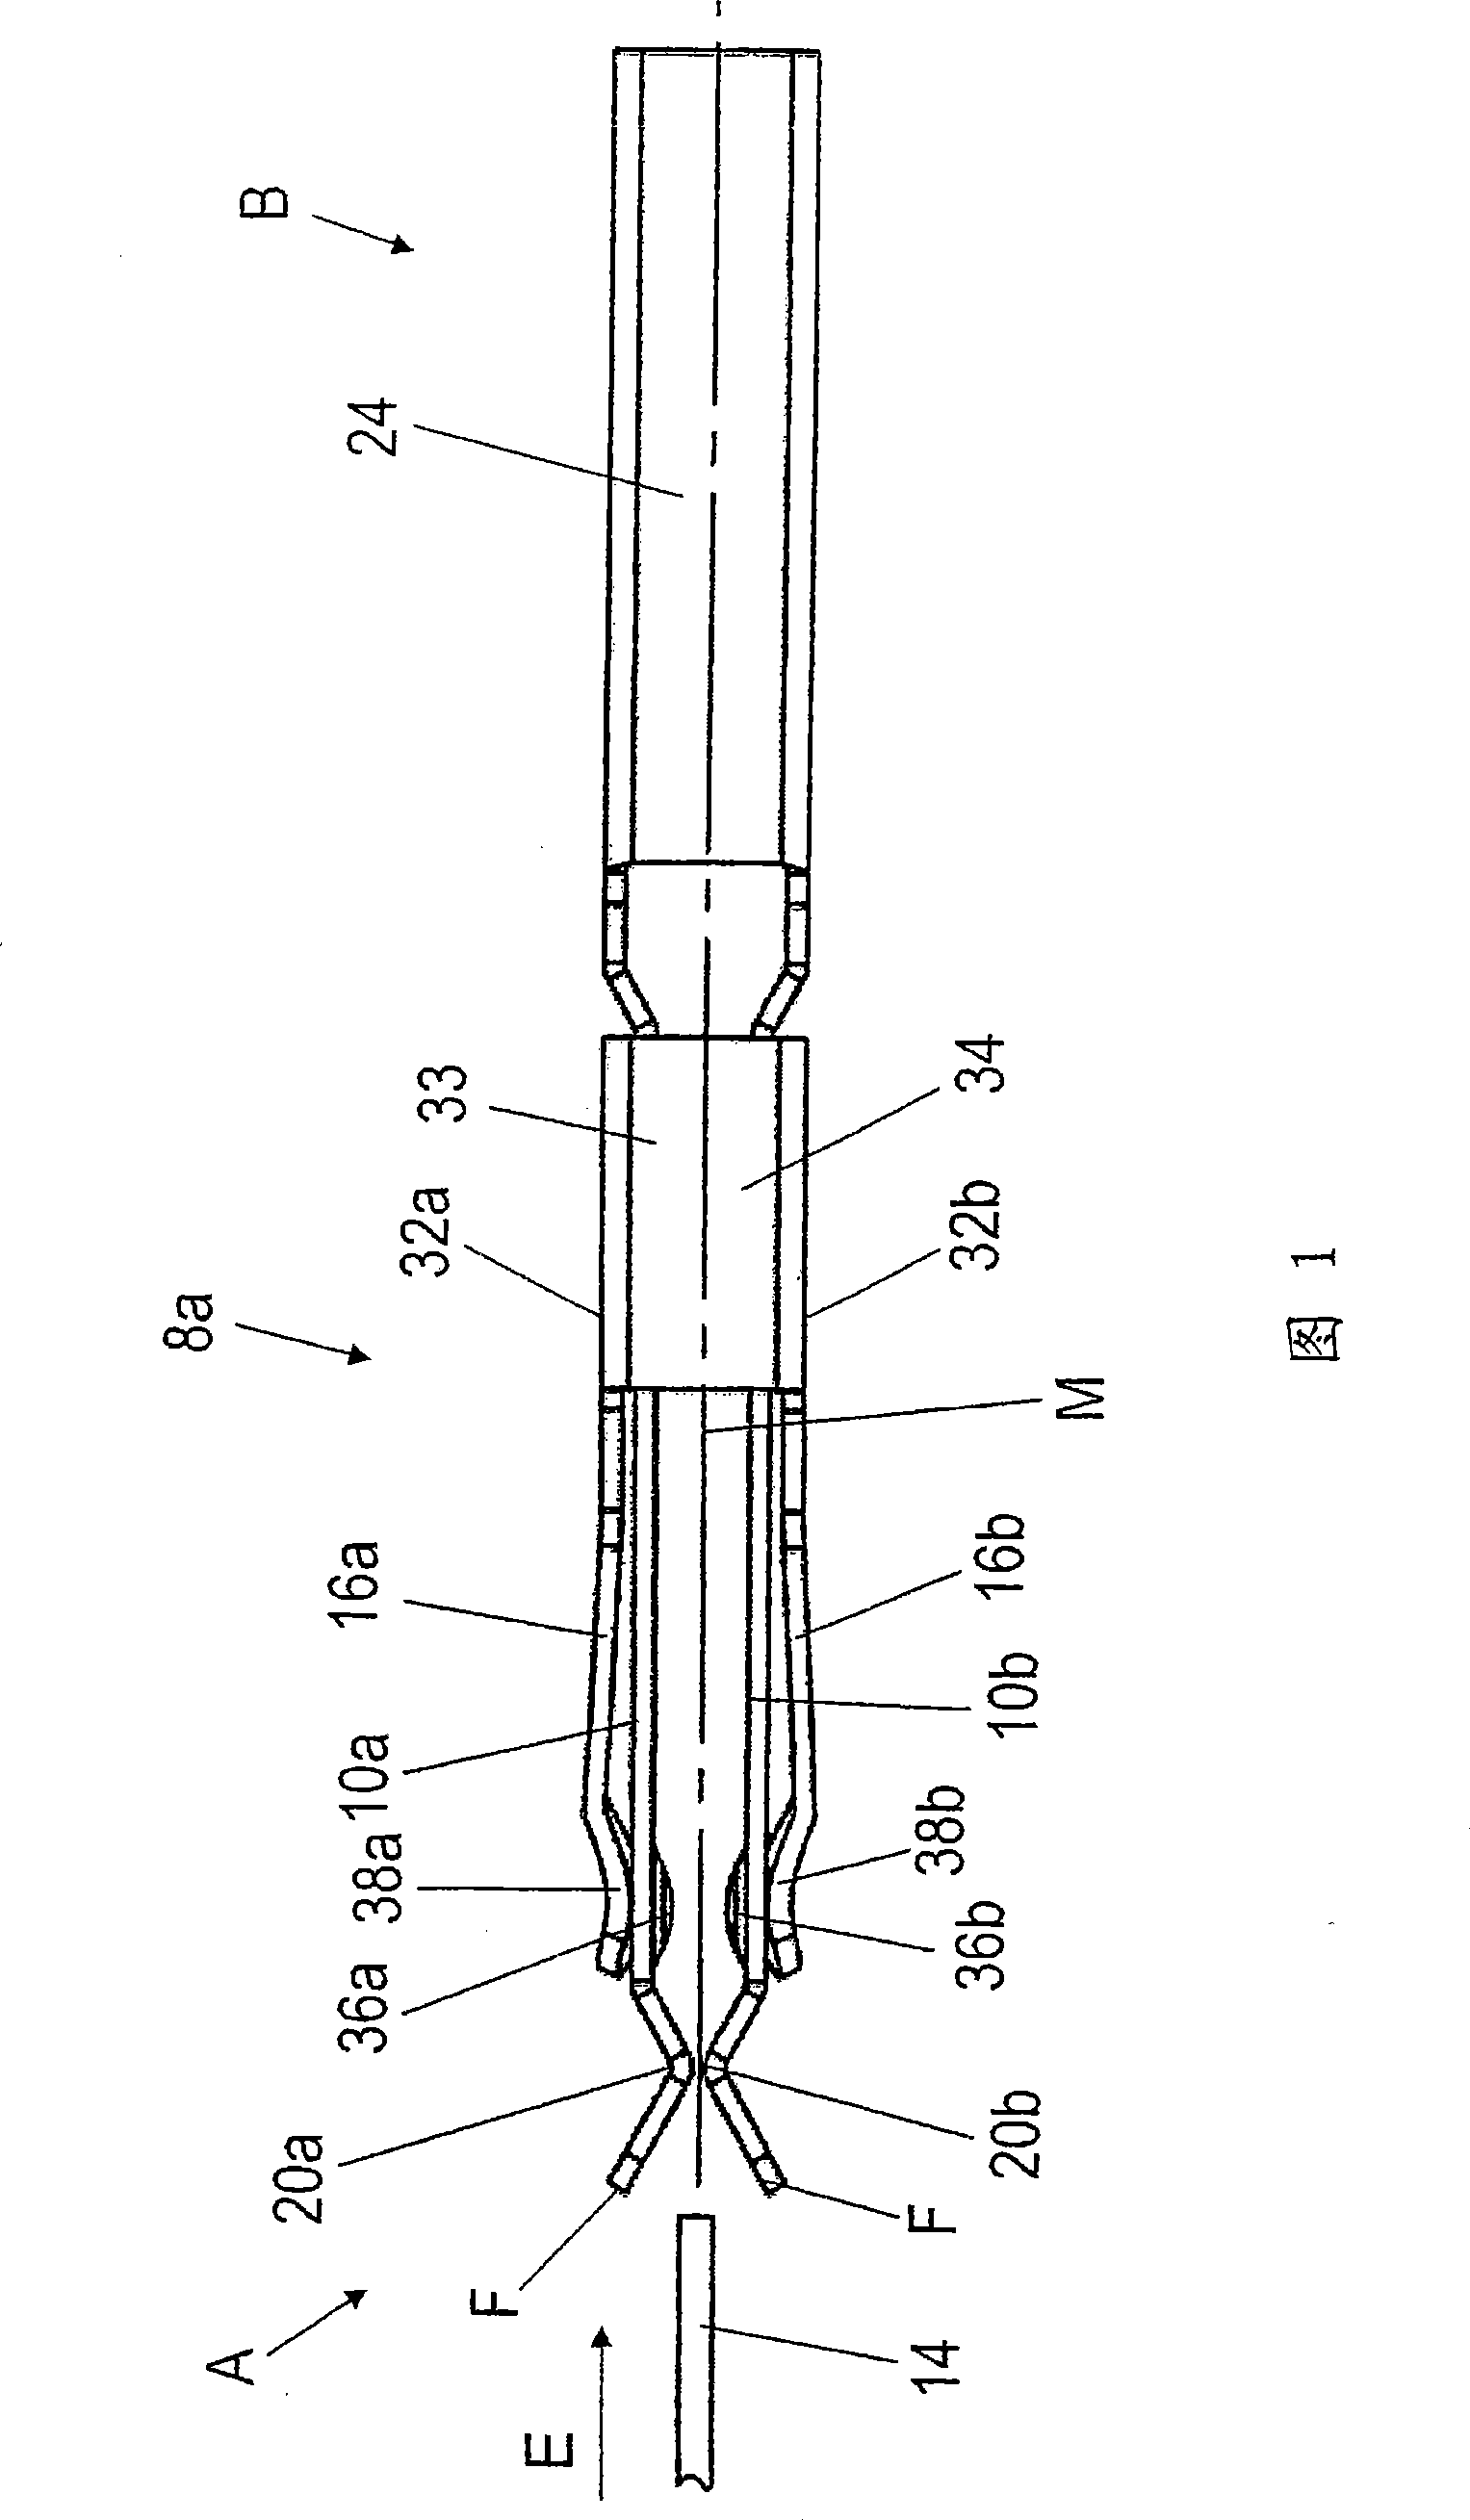 Spring contact for an electric connector and connection